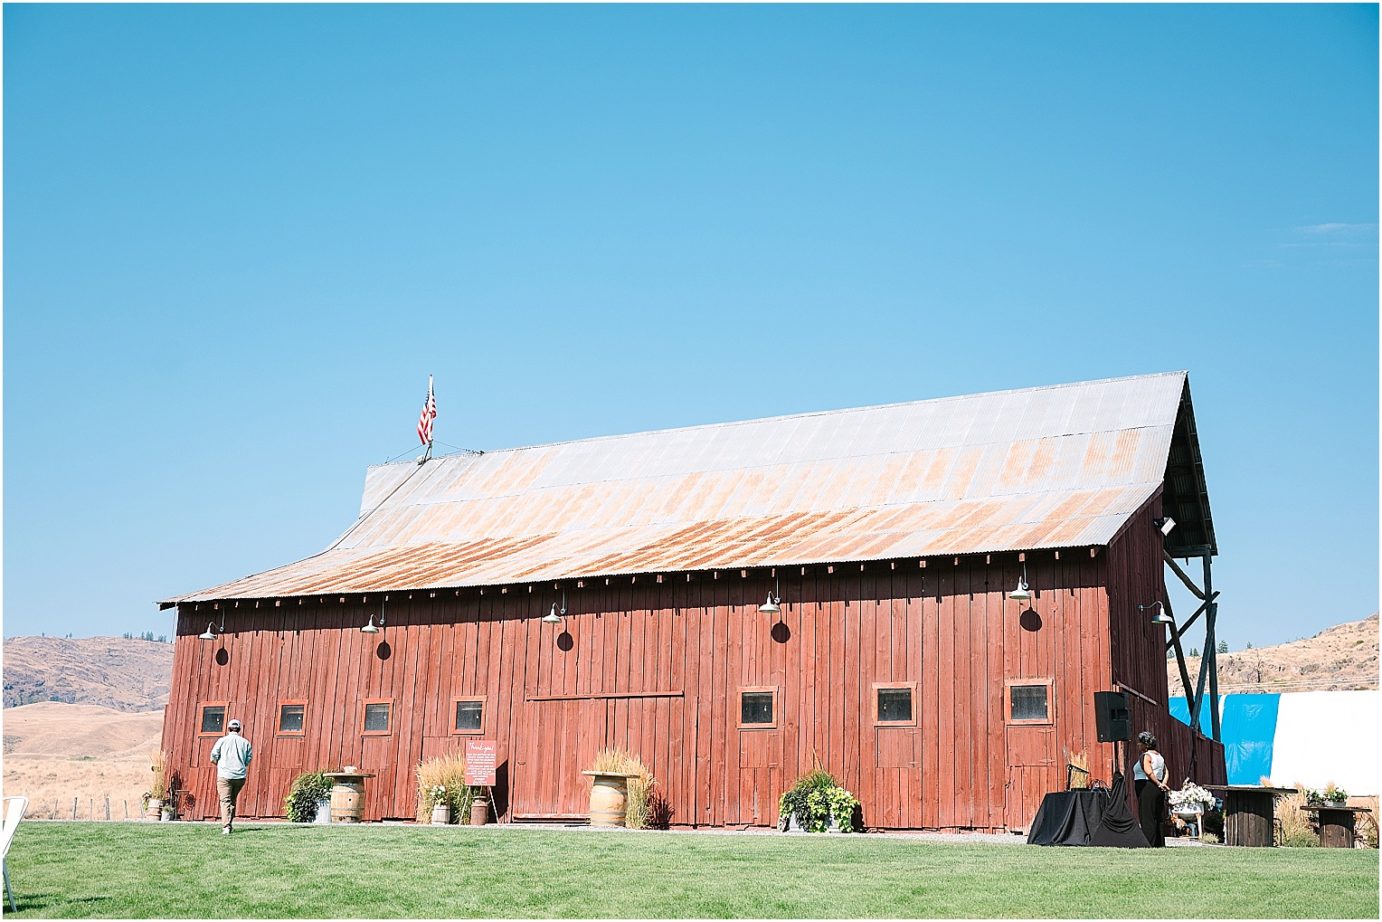 Party Barn at HJ Ranch Wedding reception site